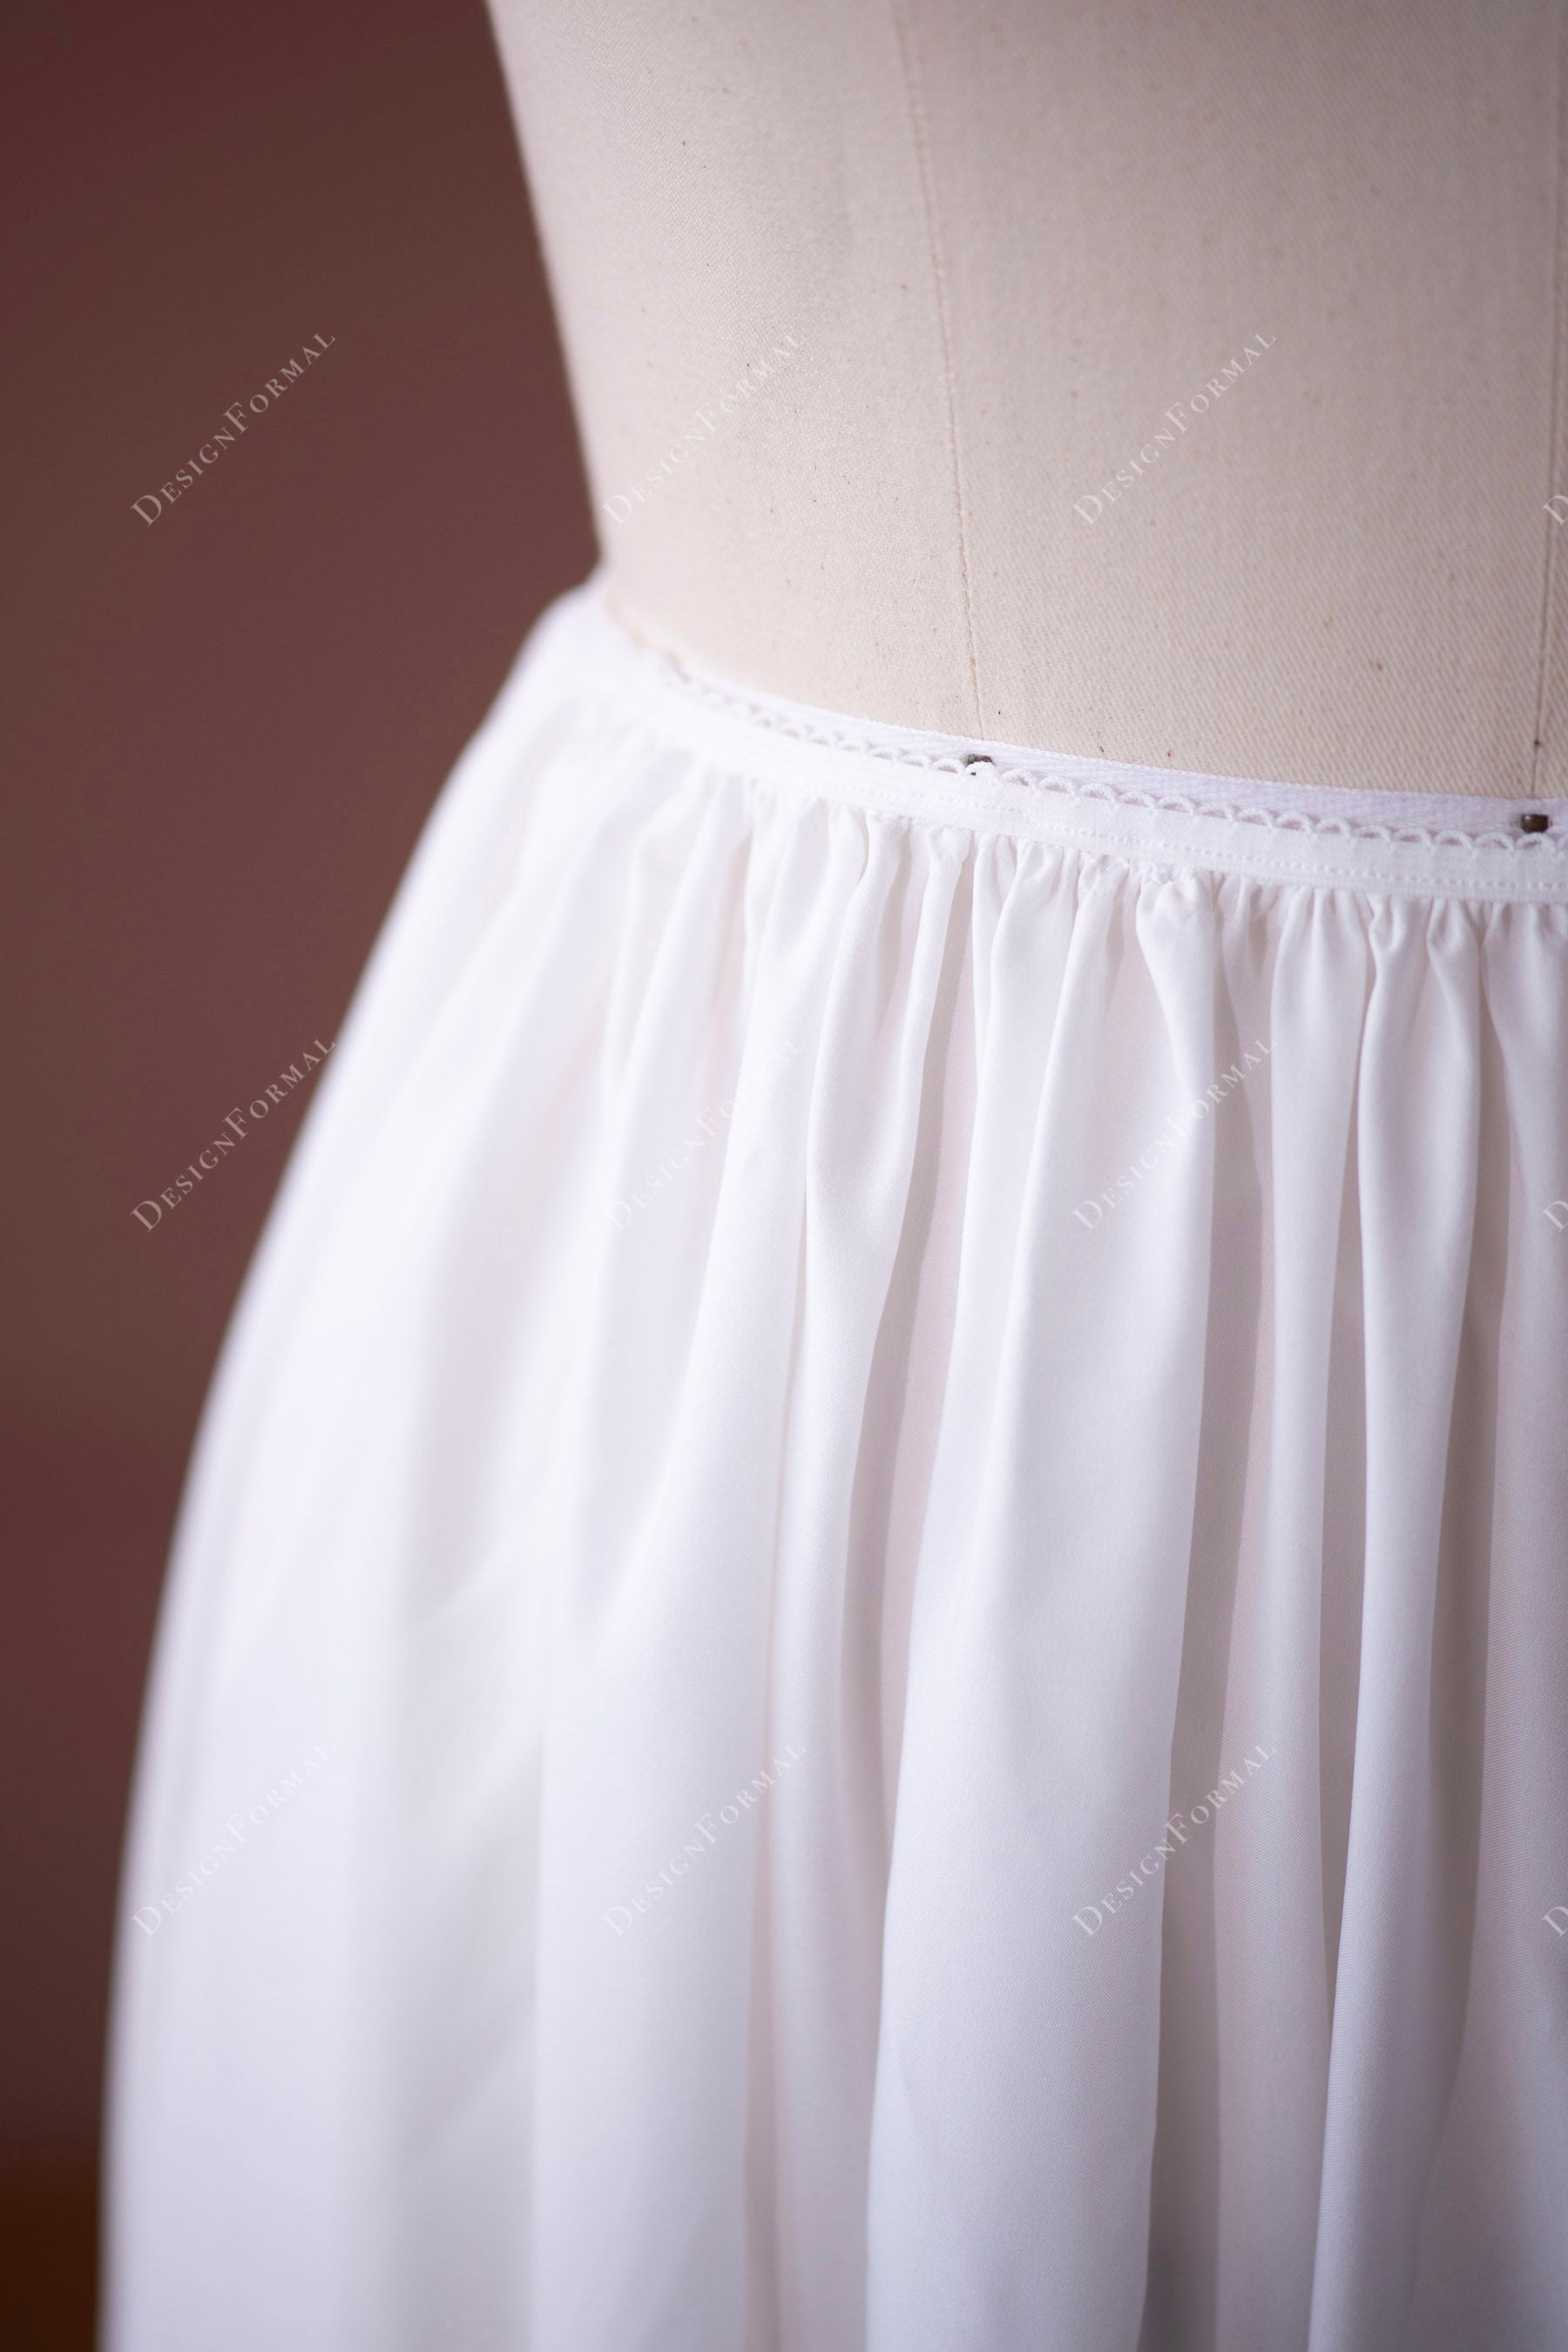 cotton skirt lining with elastic band